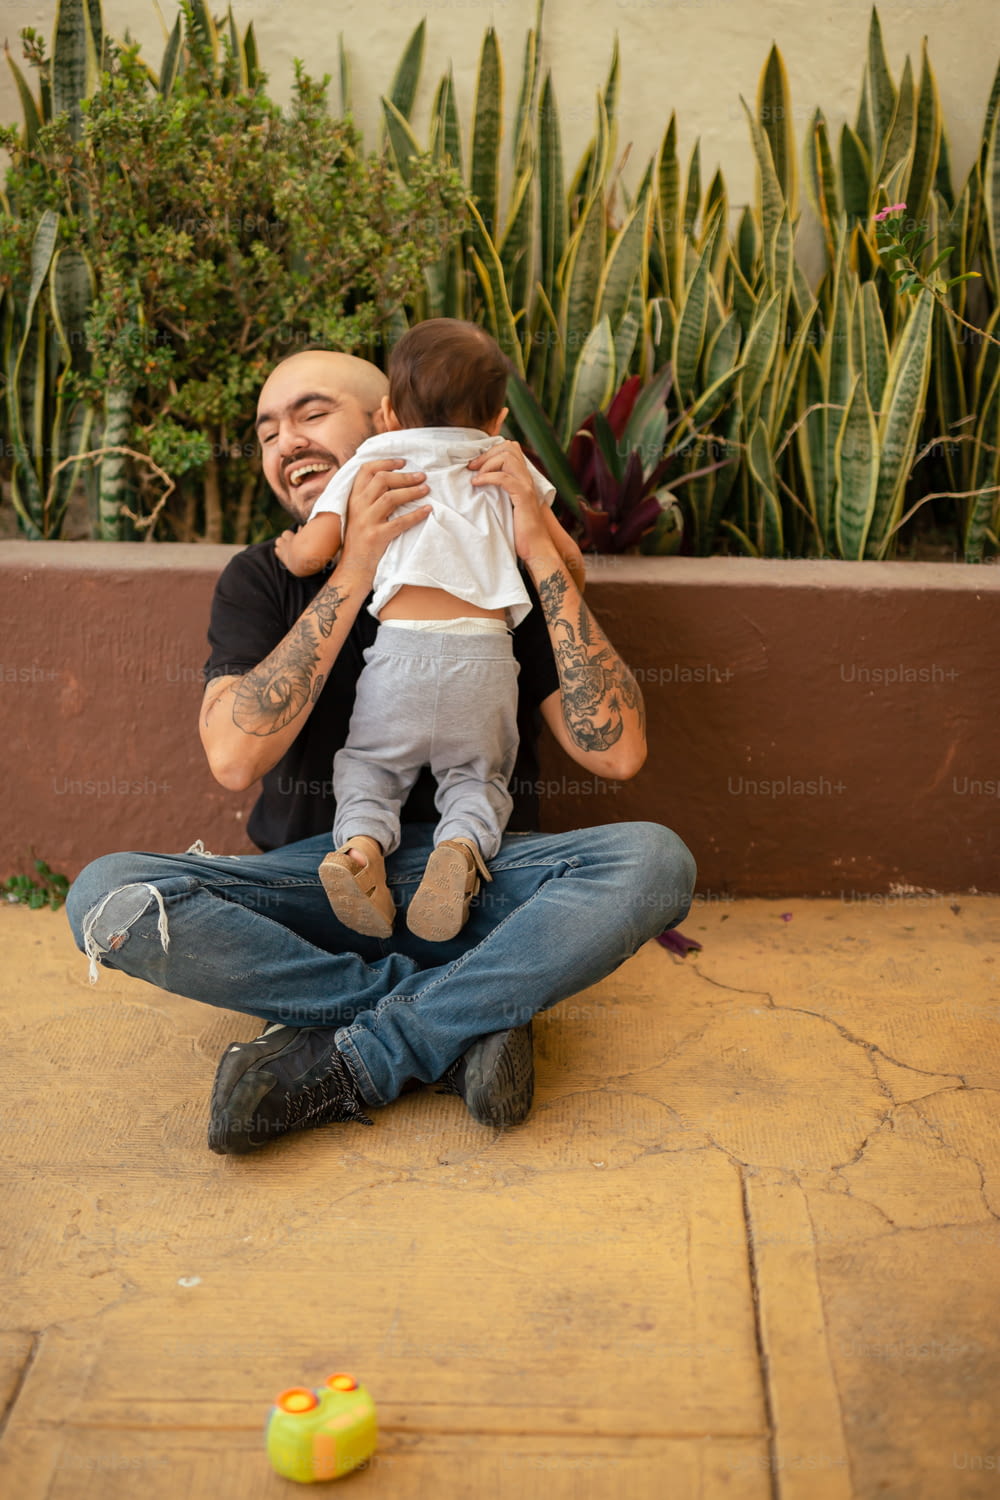 a man sitting on the ground holding a baby